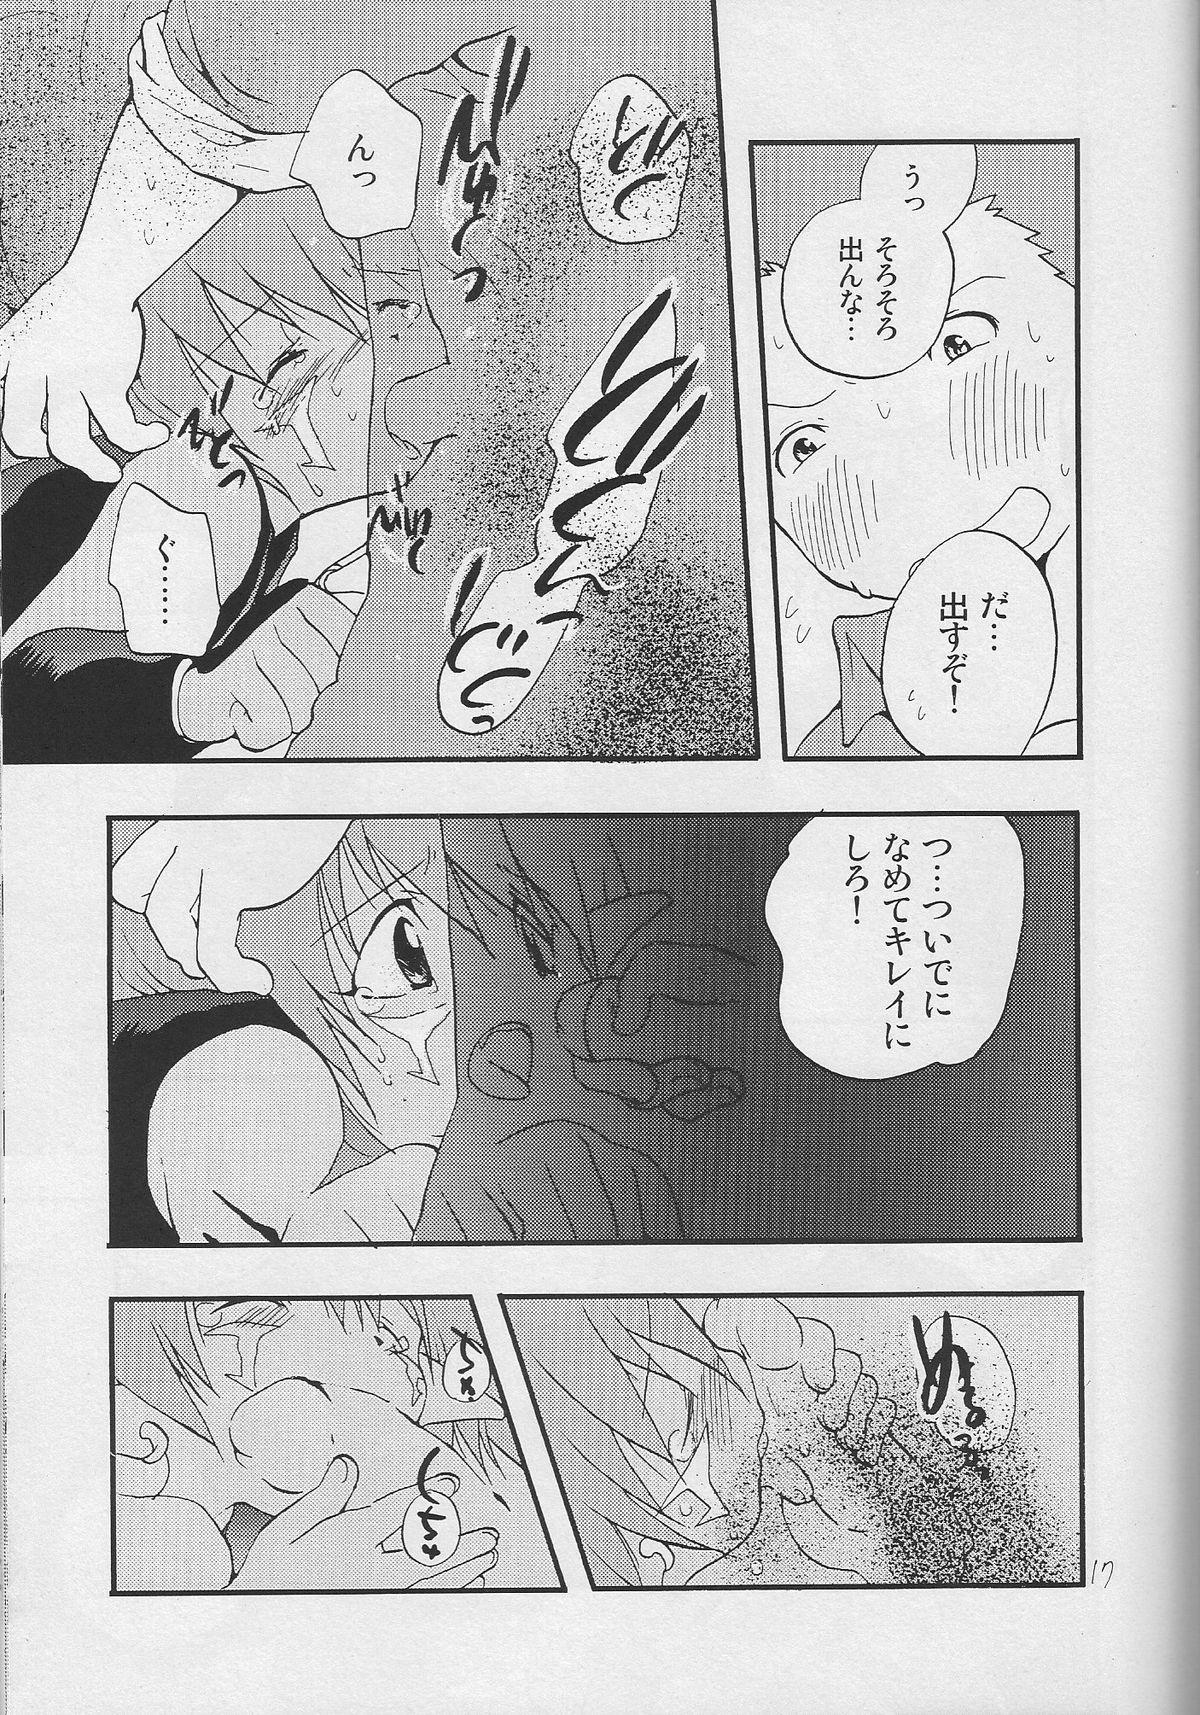 Public WHATS UP GUYS - Digimon frontier Gay Blowjob - Page 7